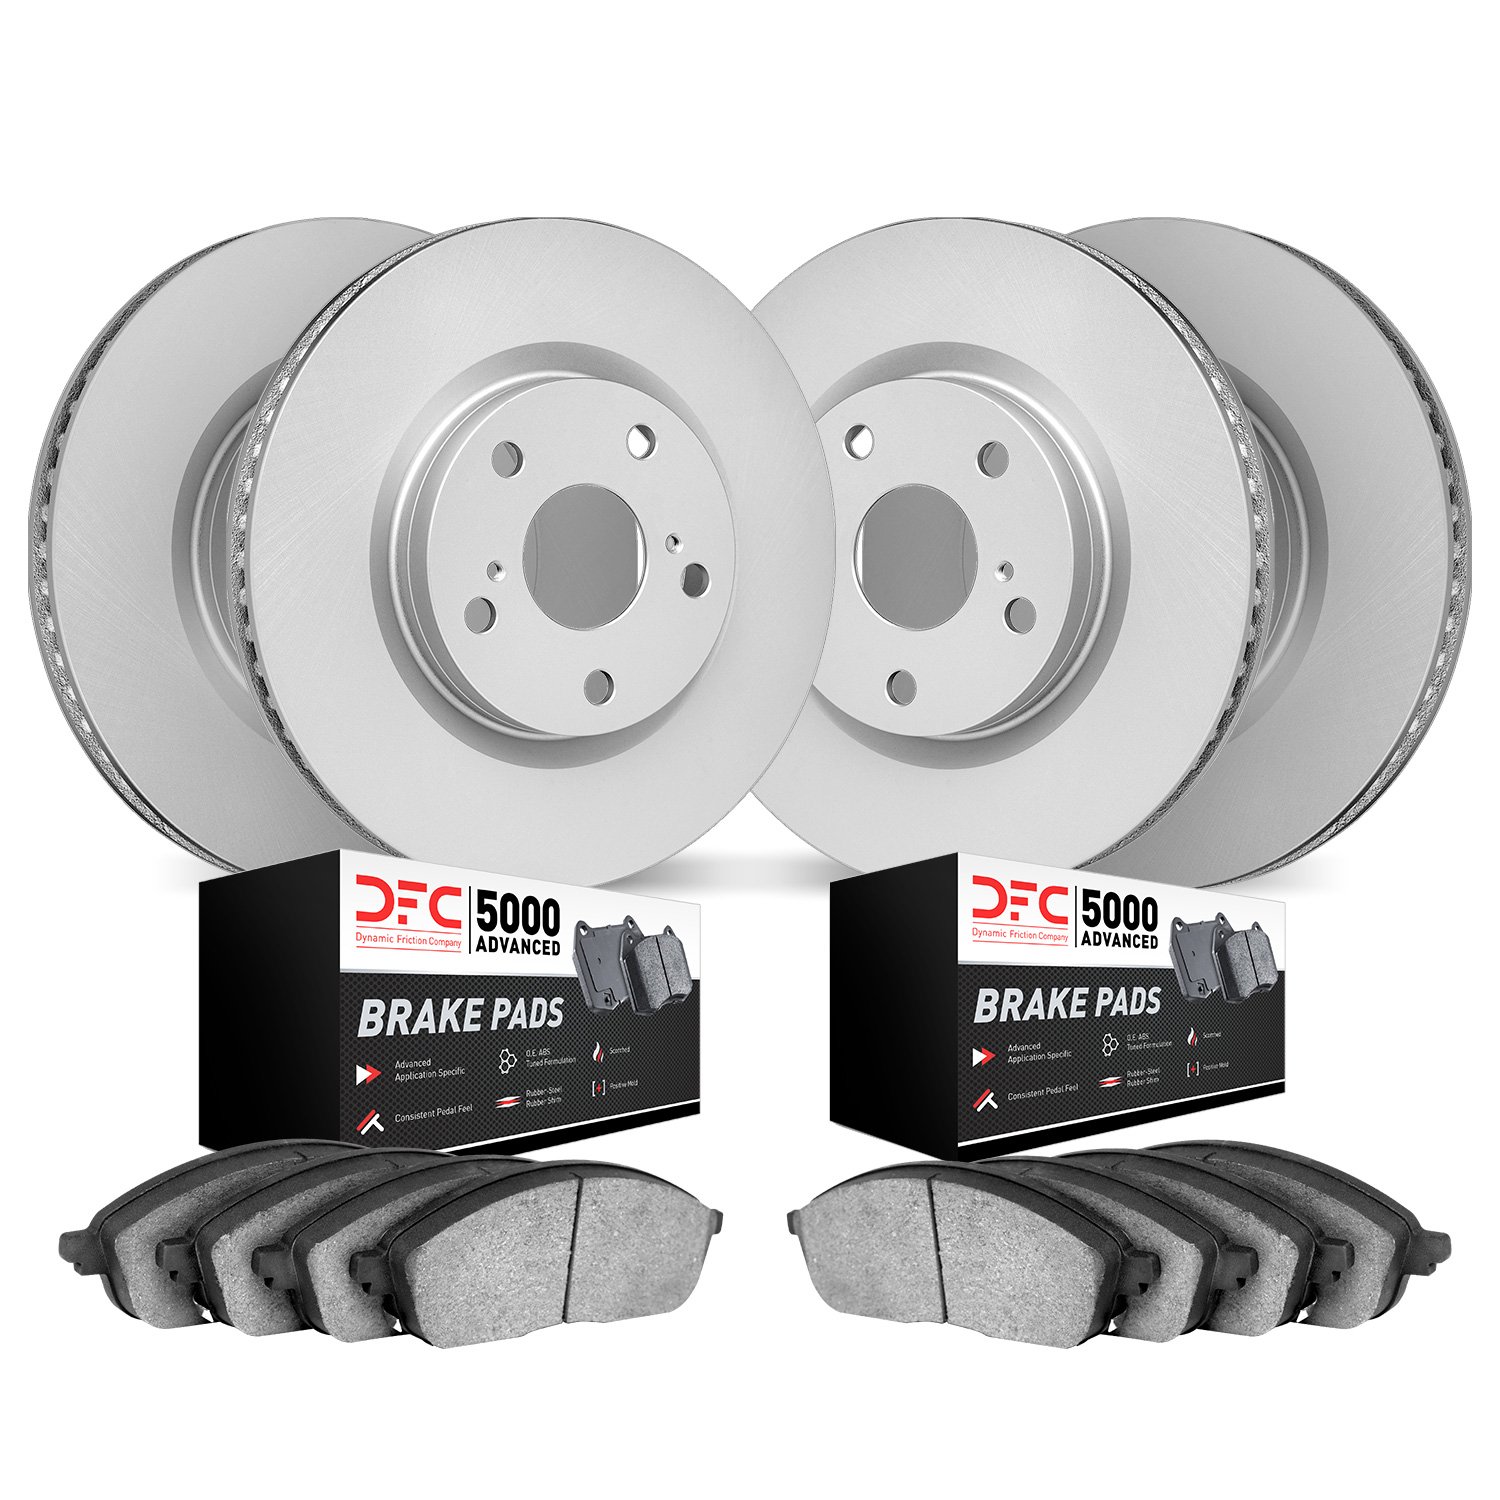 4504-63026 Geospec Brake Rotors w/5000 Advanced Brake Pads Kit, 2006-2006 Mercedes-Benz, Position: Front and Rear